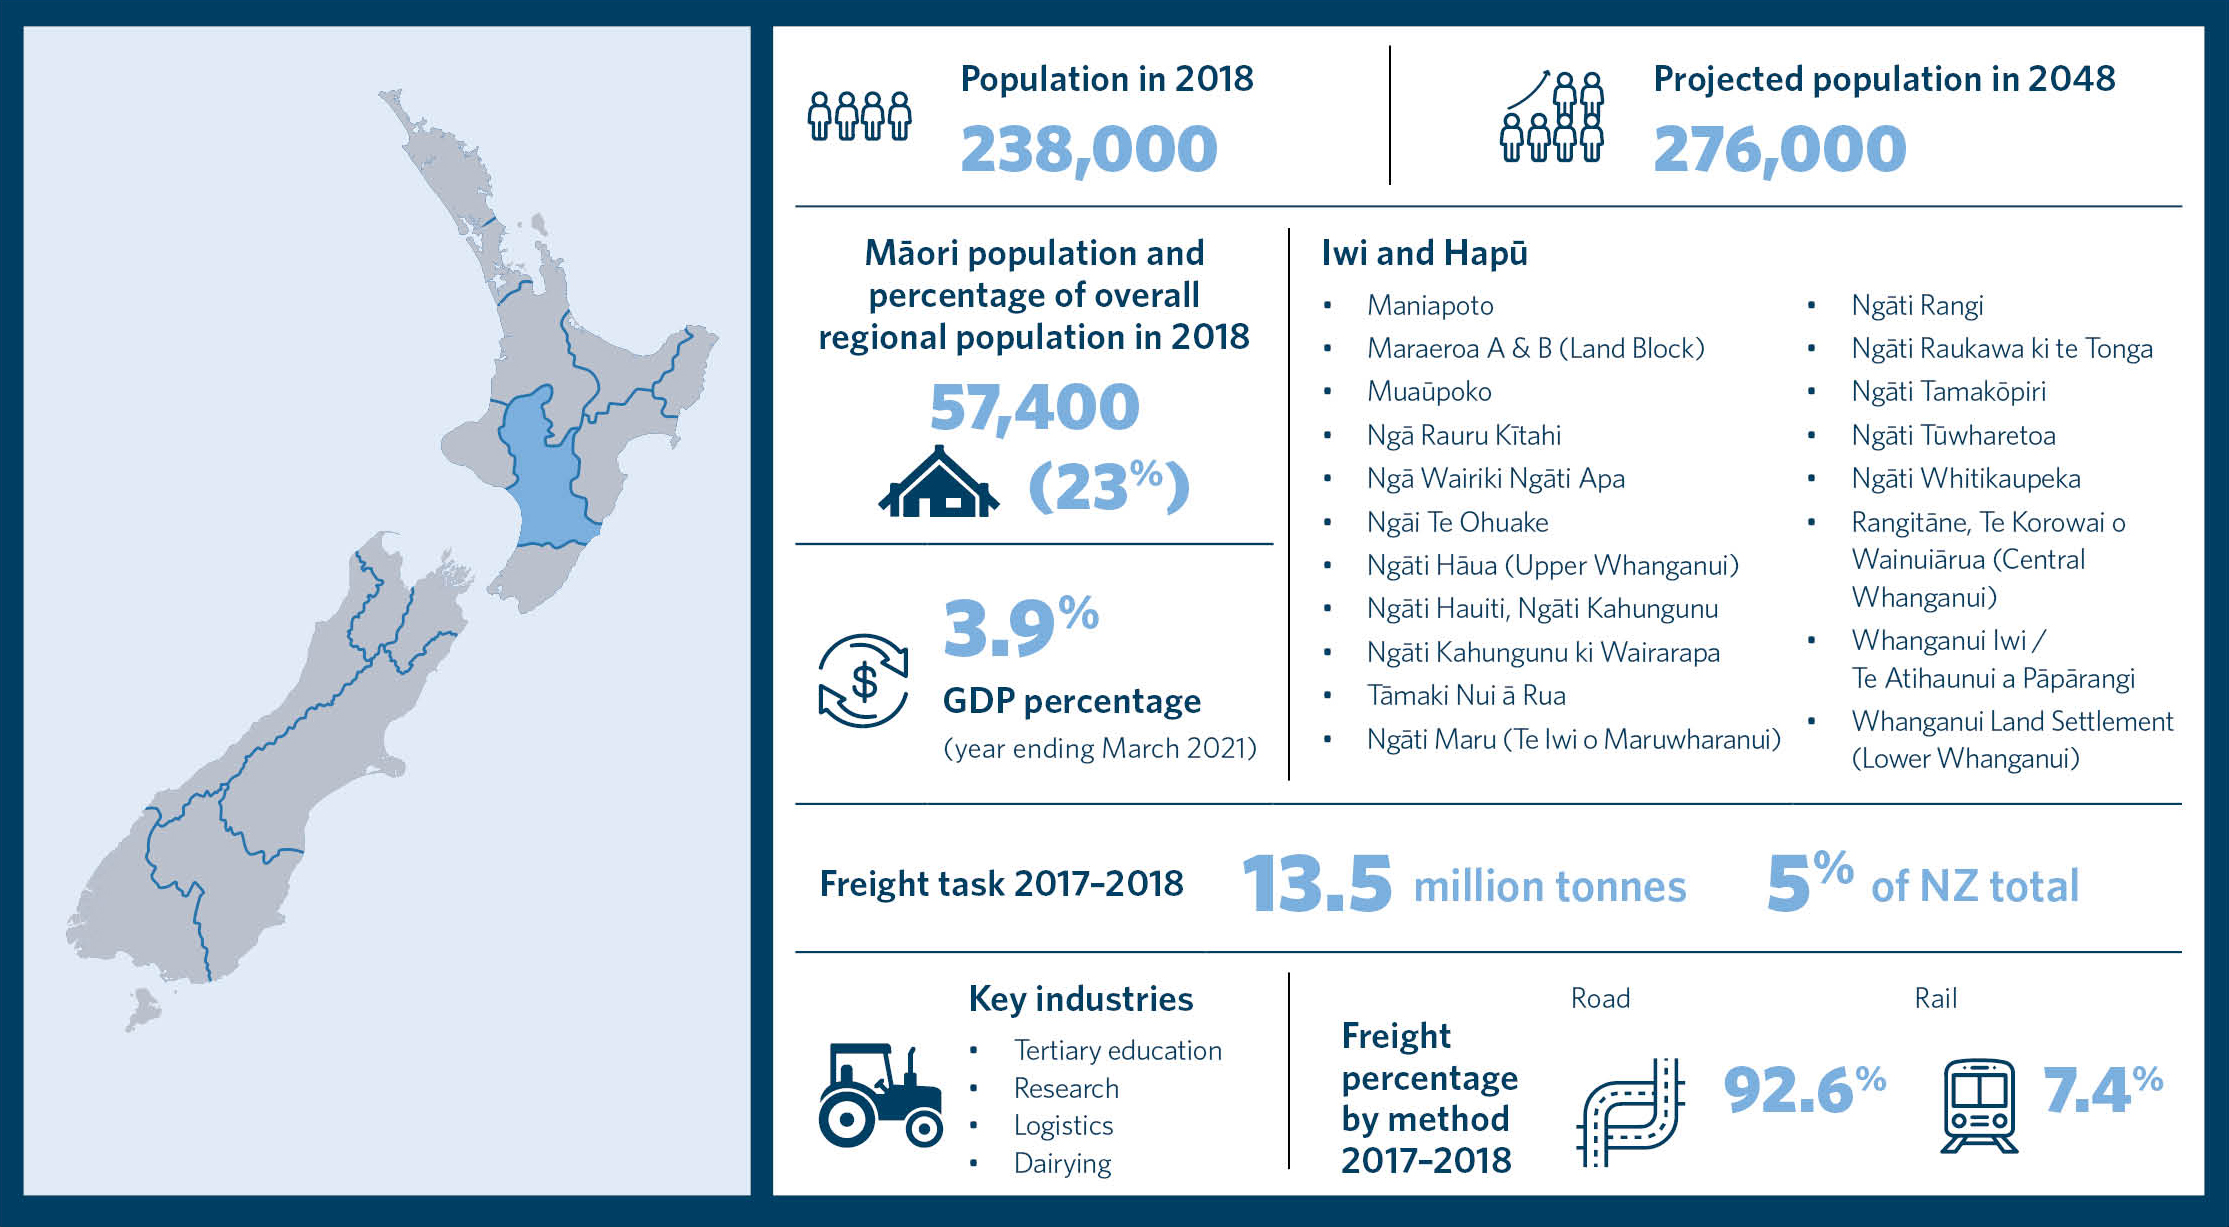 This is an infographic showing statistics for the region of Manawatū Whanganui. It includes information about the population in 2018, projected population in 2048, Māori population and percentage of overall regional population in 2018, a list of iwi and h